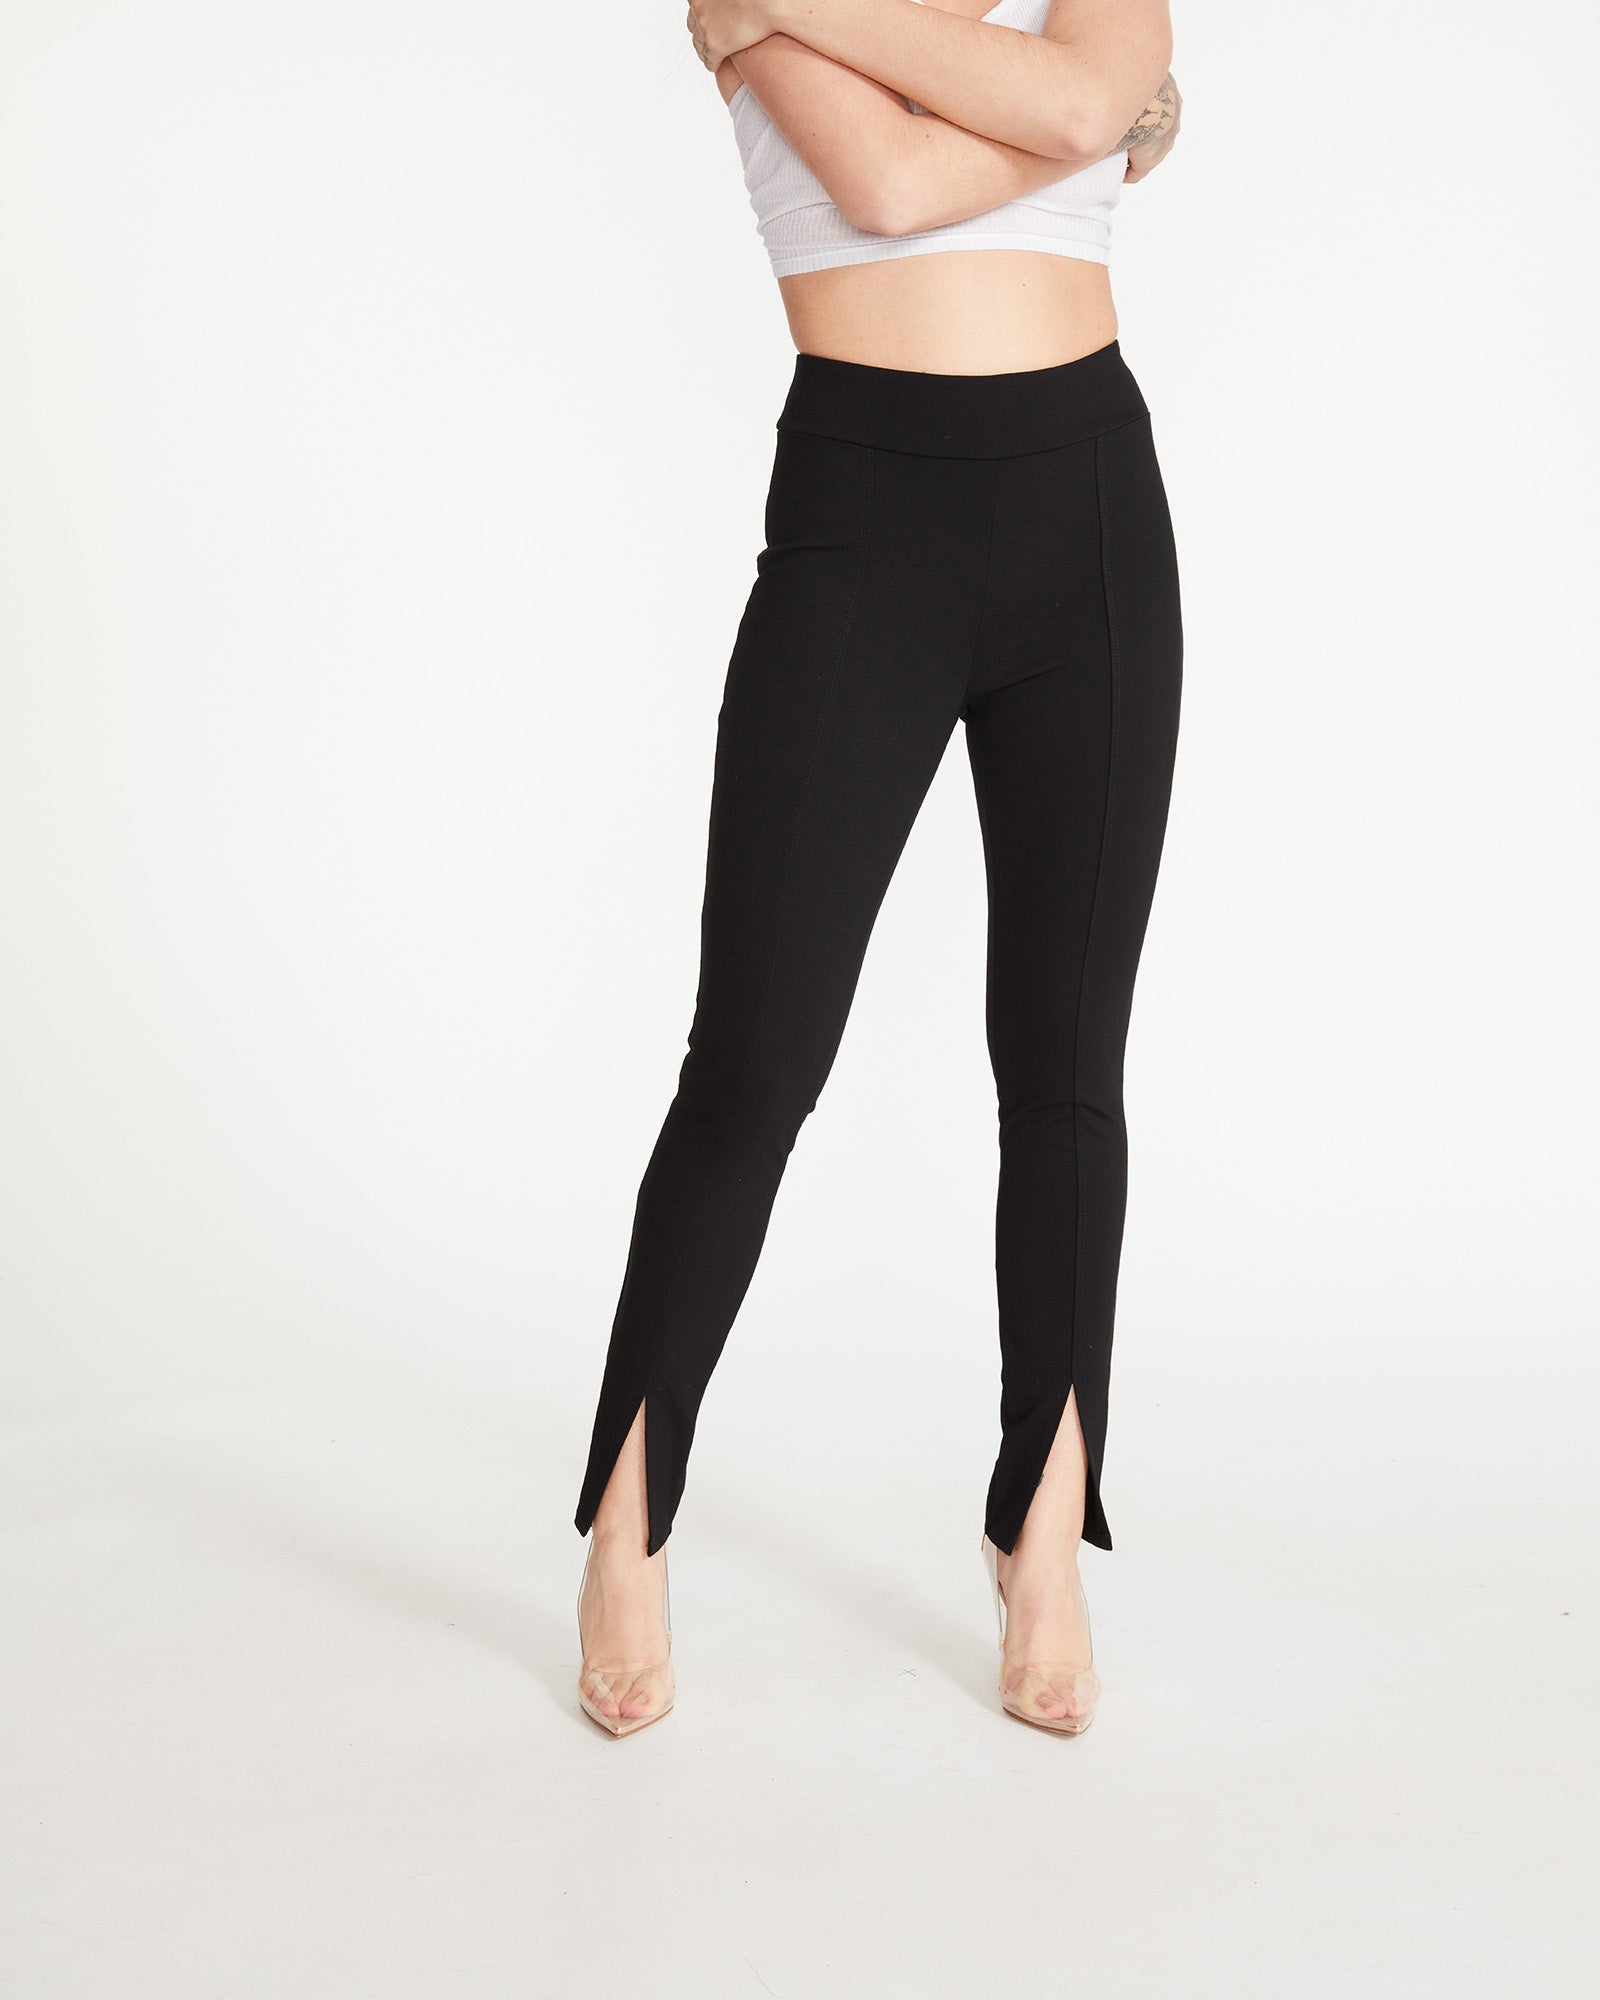 The 'Staple' High-Waisted Leggings - Dark Olive – Iron Strong Apparel